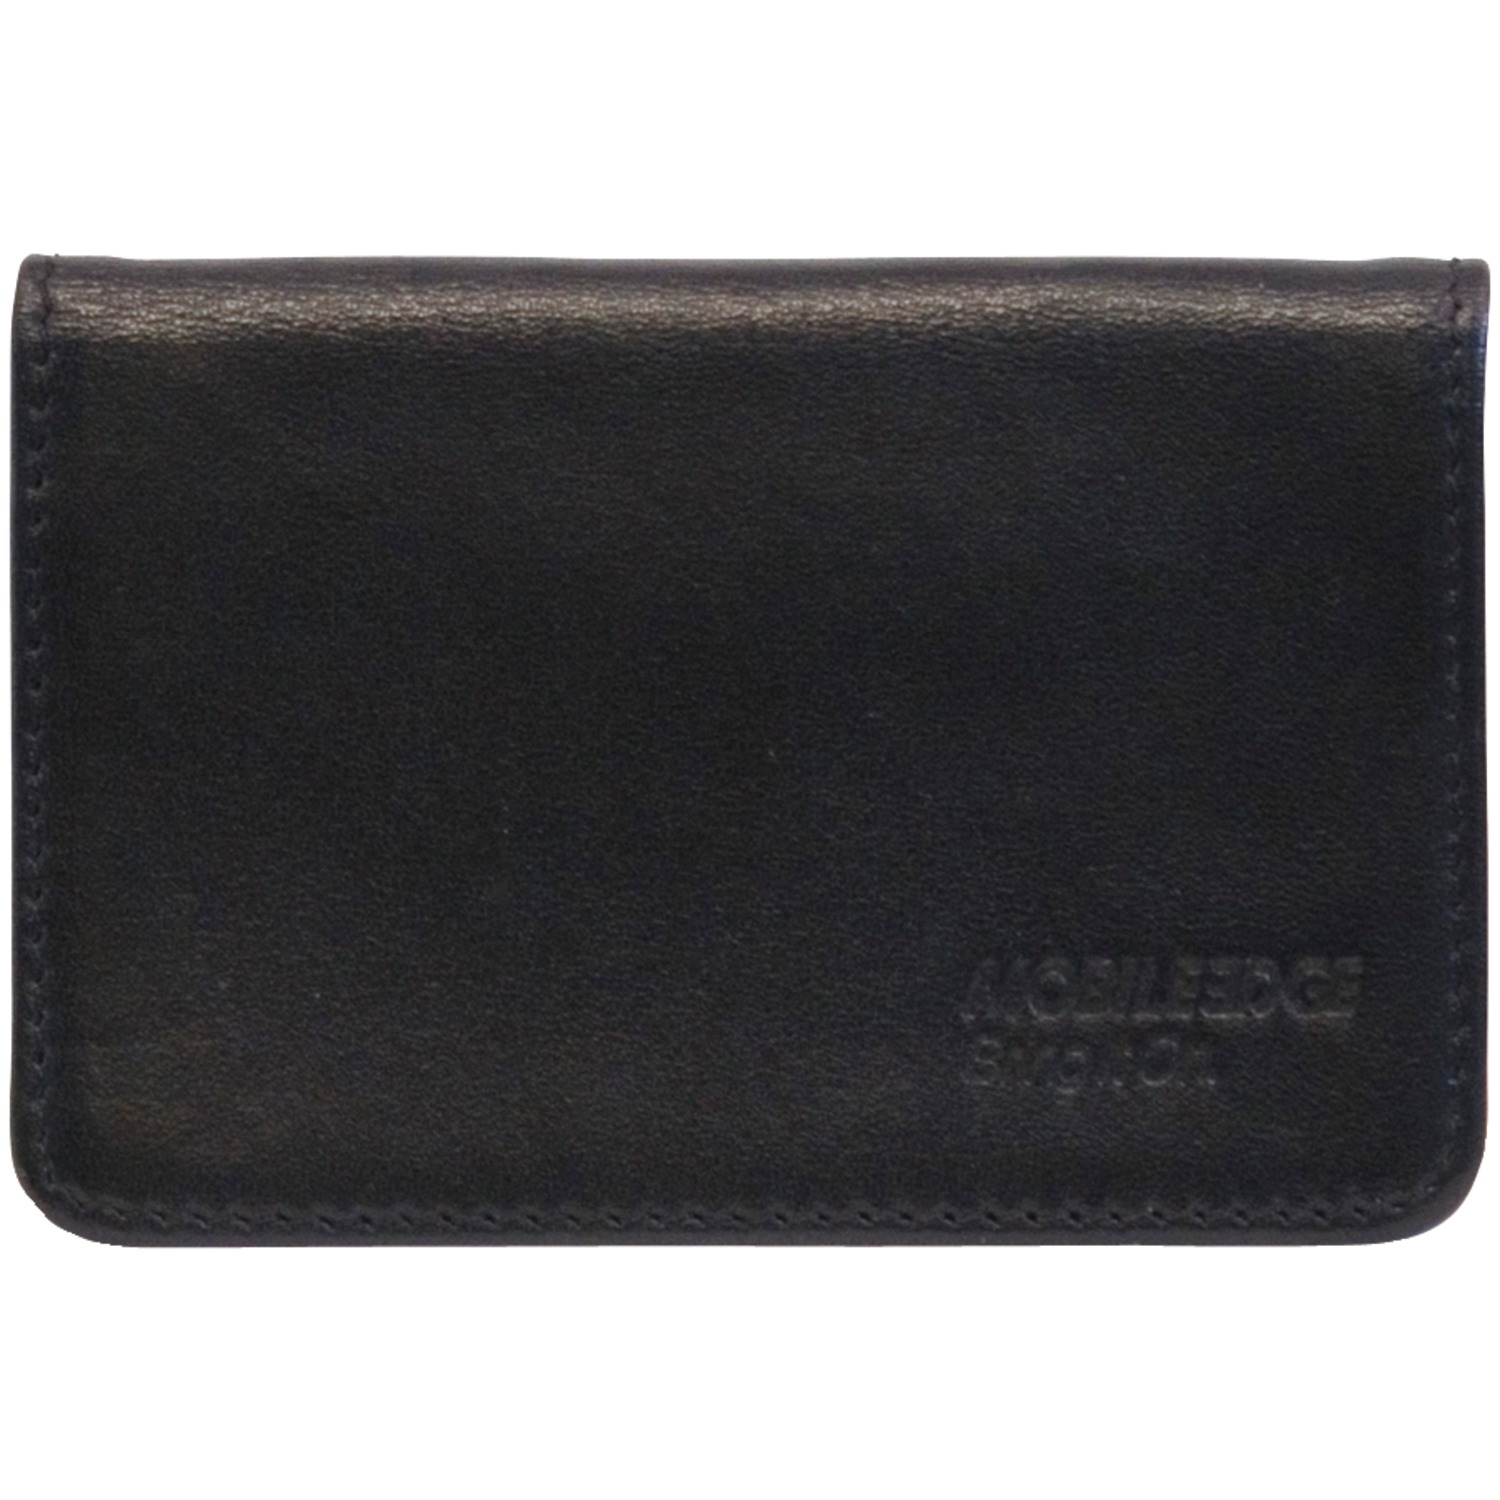 Mblmewsscw Mewss-Cw Id Sentry Credit Card Wallet - image 1 of 2